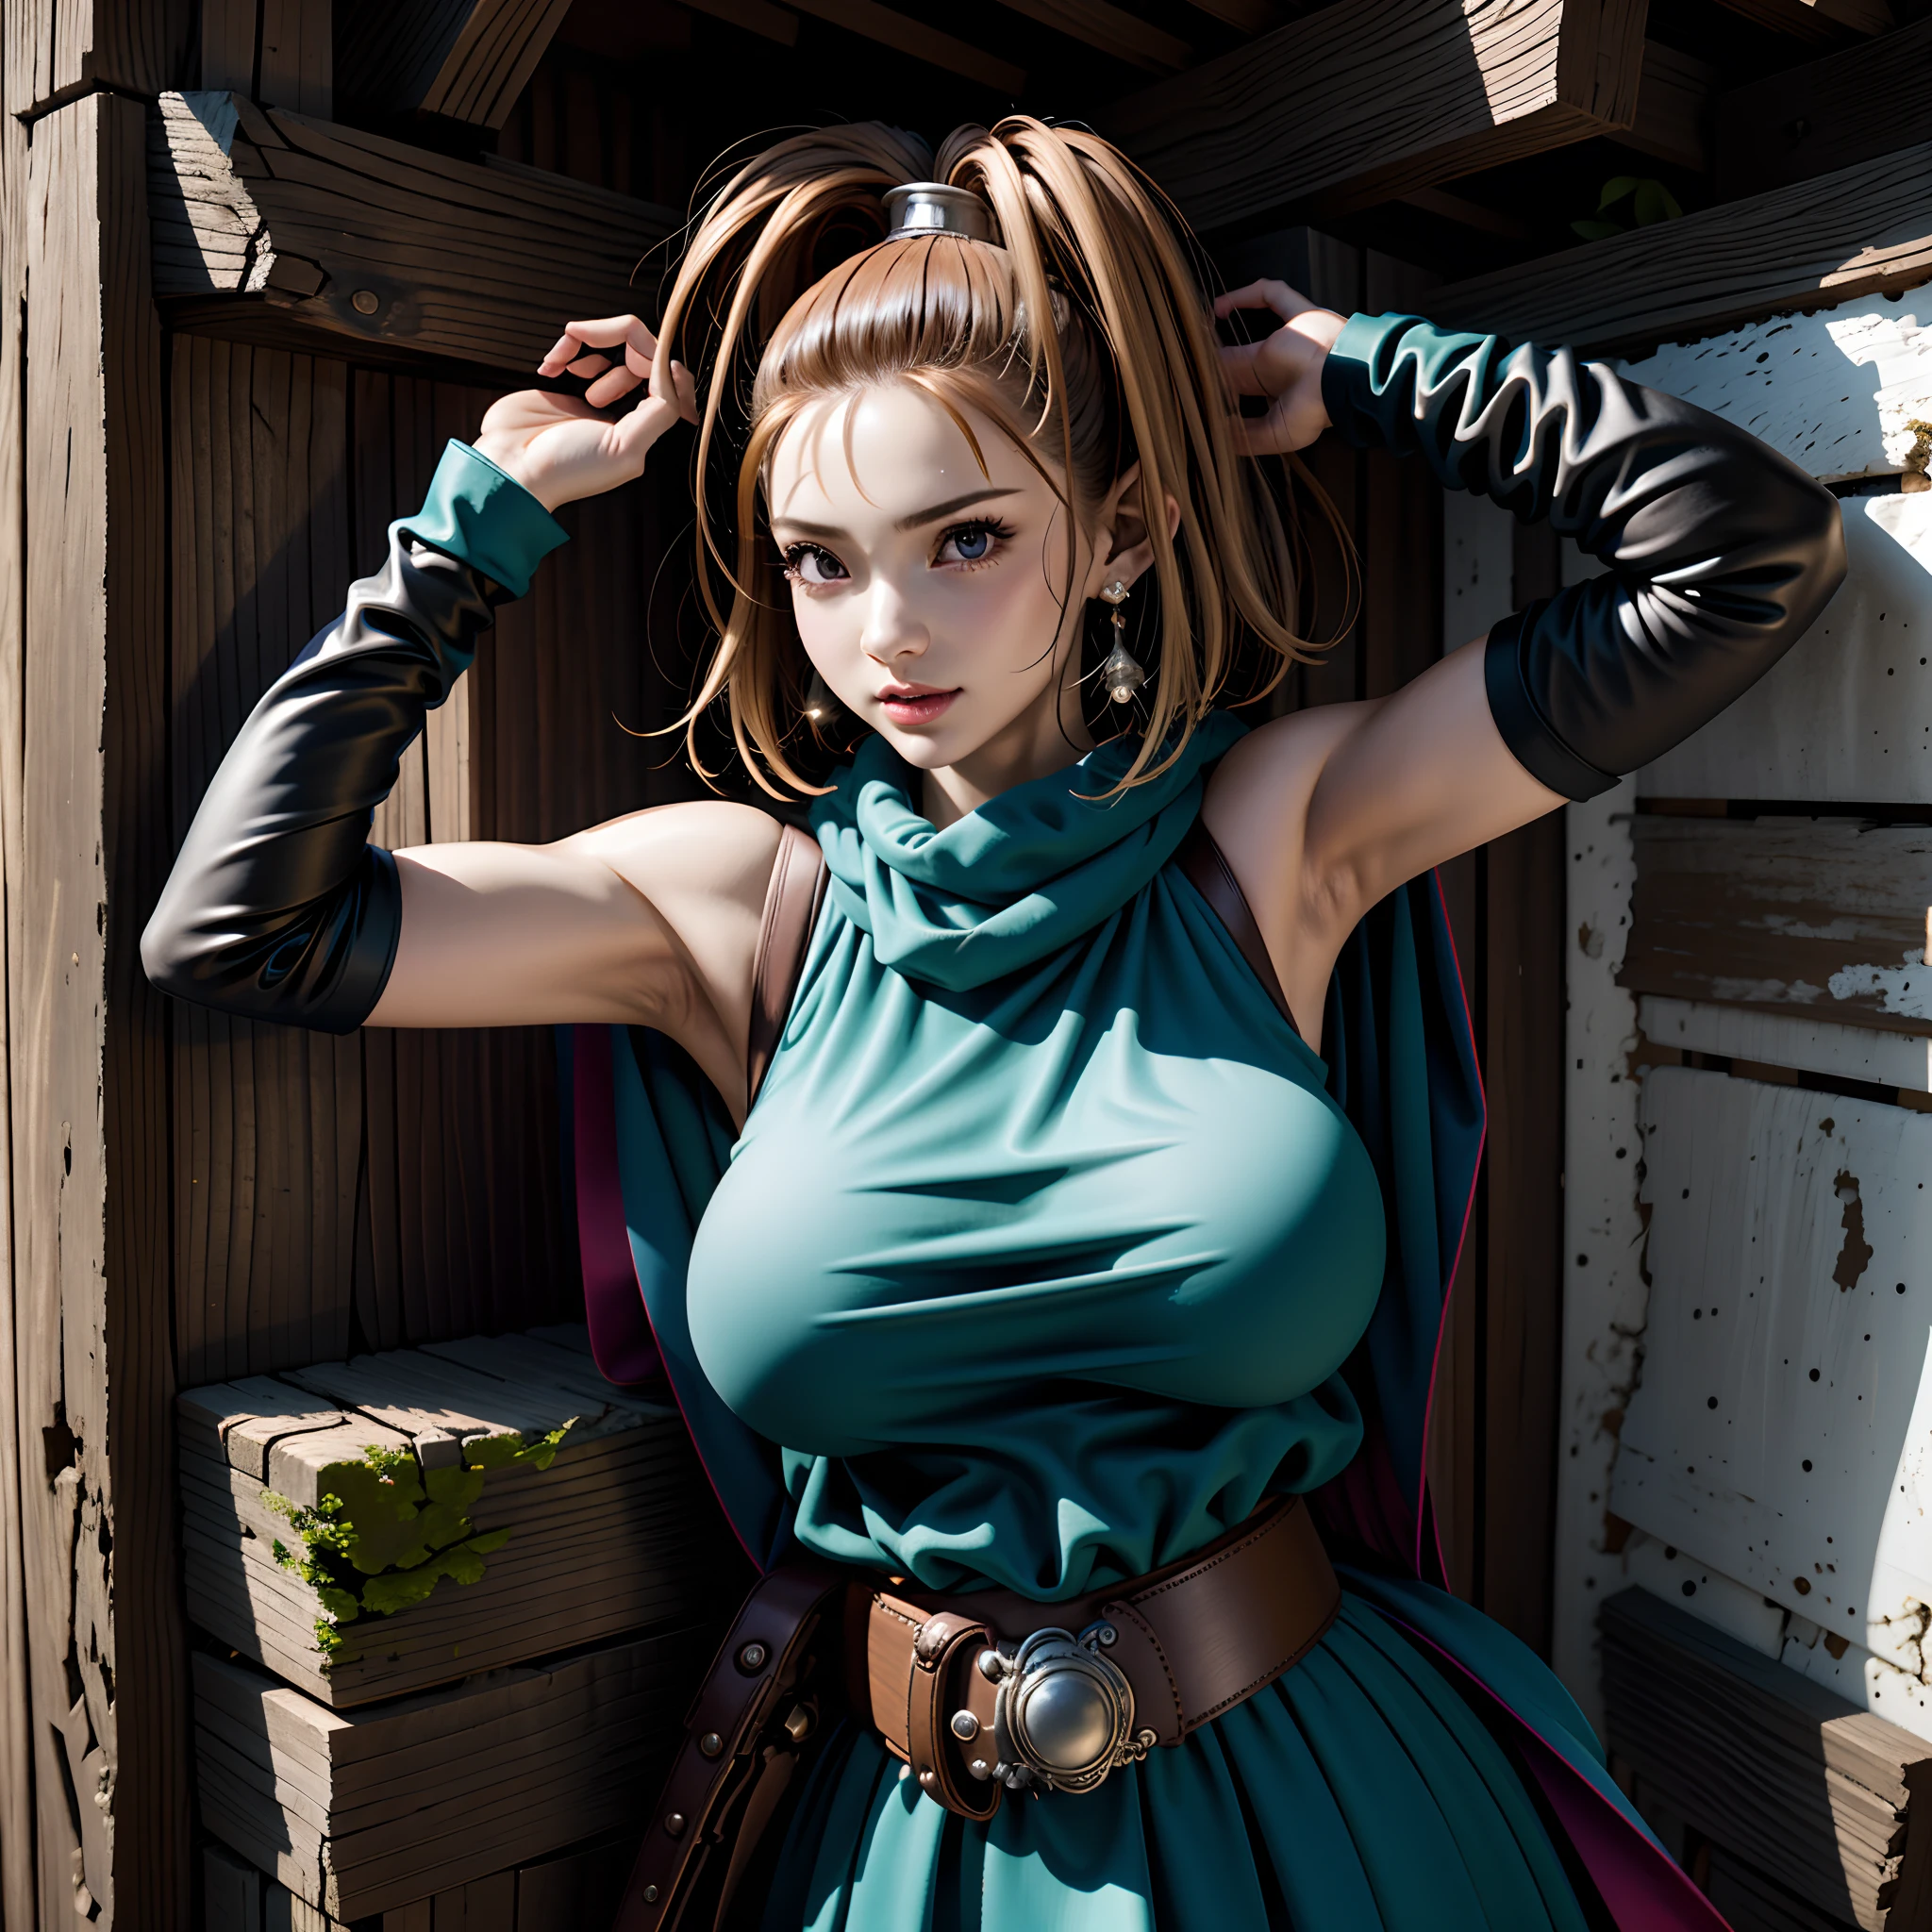 (masutepiece, Best Quality, 32 HDR, High resolution), (1womanl:2.0, Solo:2.0, 1character:2.0), (DQ6 Barbara, High Ponytail, Dress, Cape, yellow gloves, Belt bag, Jewelry, earrings), (Colossal tits:1.15, Huge boobs:1.15, Huge breasts:1.15), Highly detailed, (Exposed shaved armpits:1.25, in the abandoned house:1.1, in a deep forest), hyperdetailed face, ultra detailed skin texture,